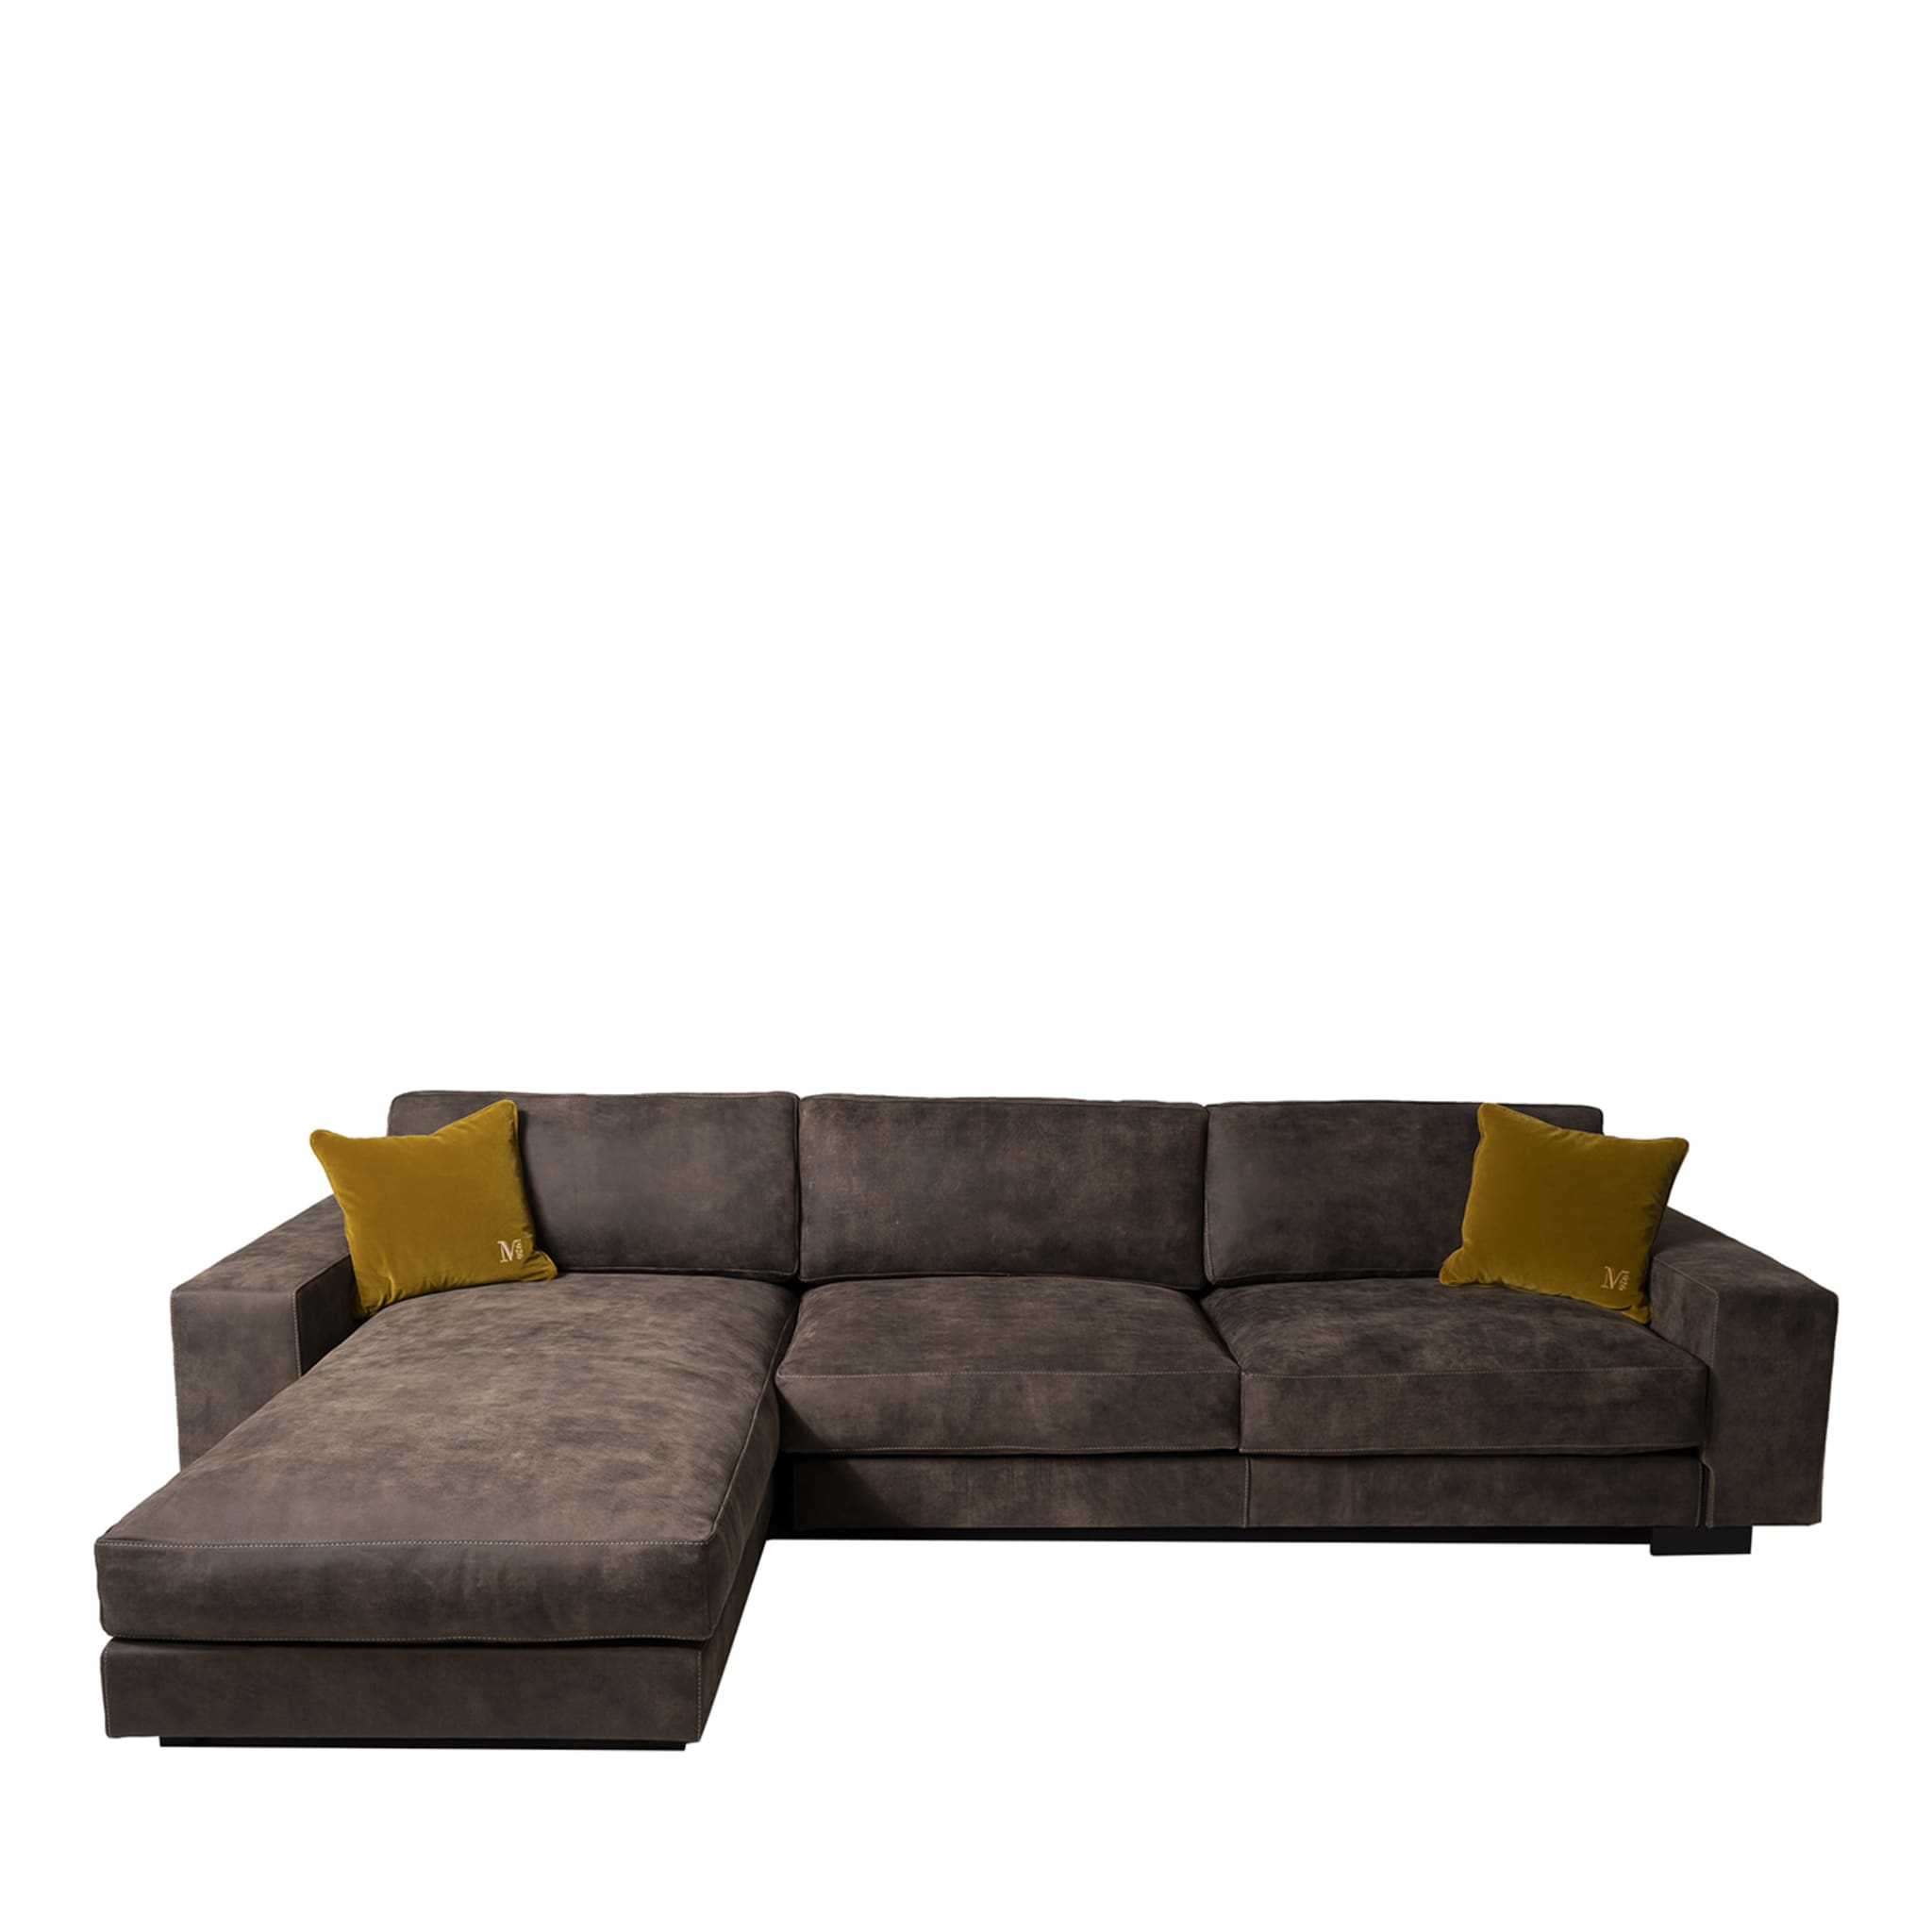 Glam 3-Seater Sofa By Marco and Giulio Mantellassi - Main view